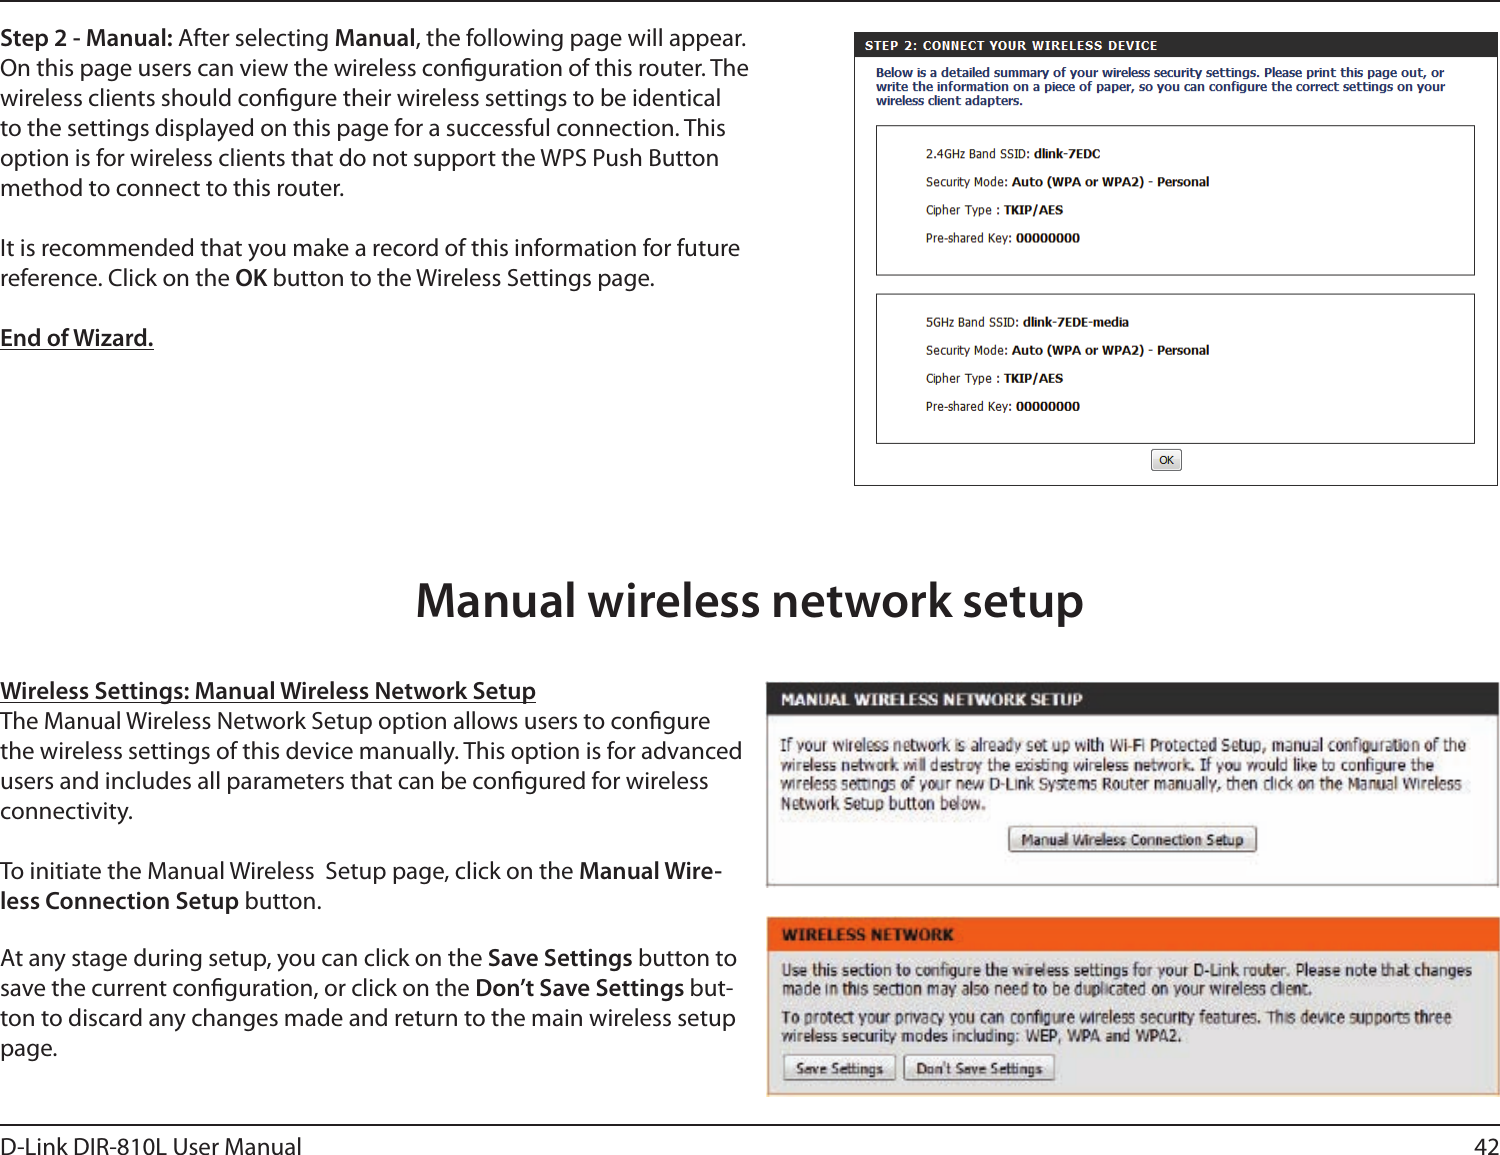 42D-Link DIR-810L User ManualStep 2 - Manual: After selecting Manual, the following page will appear. On this page users can view the wireless conguration of this router. The wireless clients should congure their wireless settings to be identical to the settings displayed on this page for a successful connection. This option is for wireless clients that do not support the WPS Push Button method to connect to this router.It is recommended that you make a record of this information for future reference. Click on the OK button to the Wireless Settings page.End of Wizard.Wireless Settings: Manual Wireless Network SetupThe Manual Wireless Network Setup option allows users to congure the wireless settings of this device manually. This option is for advanced users and includes all parameters that can be congured for wireless connectivity.To initiate the Manual Wireless  Setup page, click on the Manual Wire-less Connection Setup button.At any stage during setup, you can click on the Save Settings button to save the current conguration, or click on the Don’t Save Settings but-ton to discard any changes made and return to the main wireless setup page.Manual wireless network setup